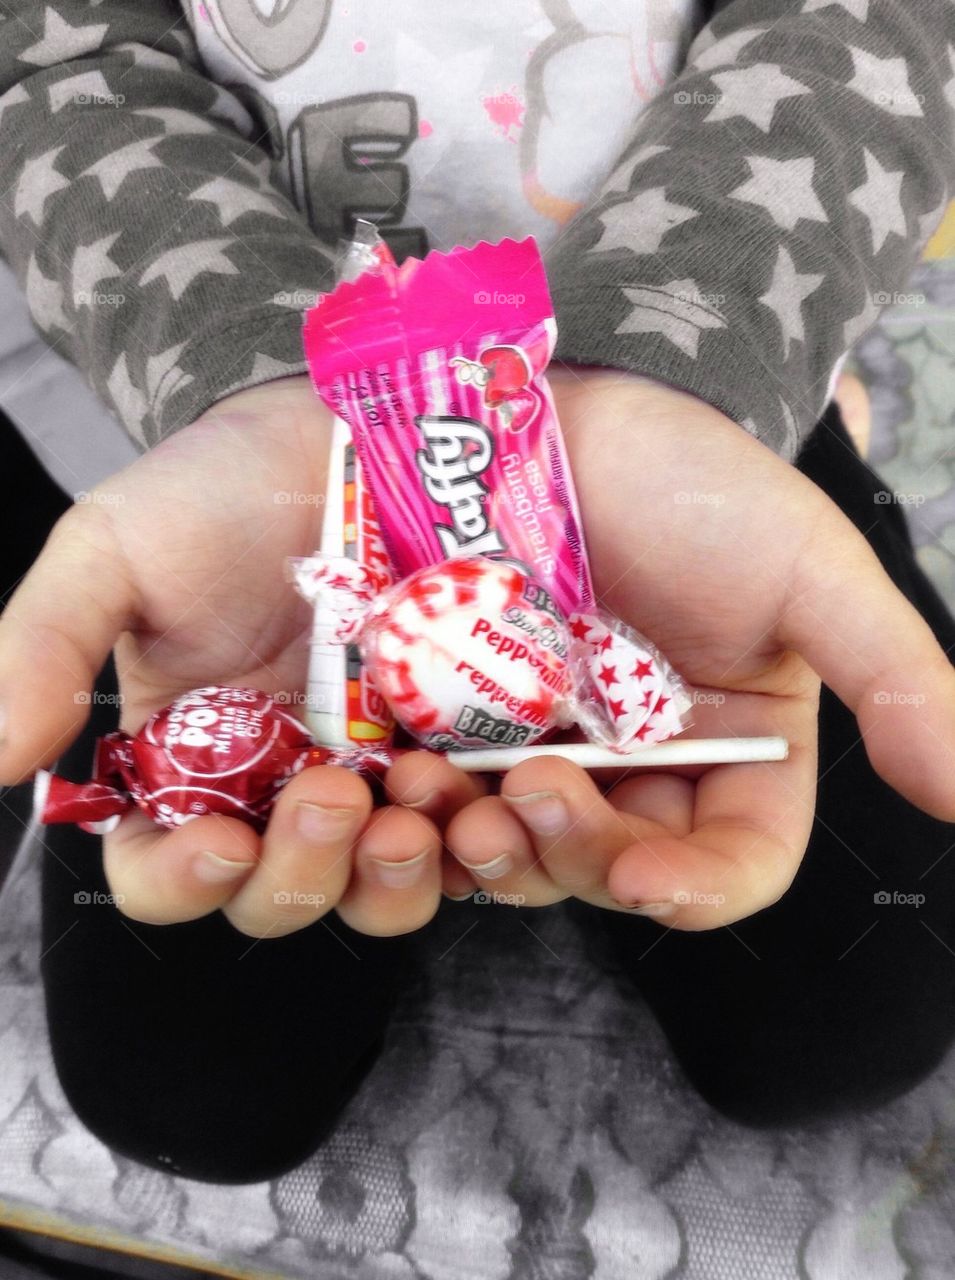 Handful of Candy 